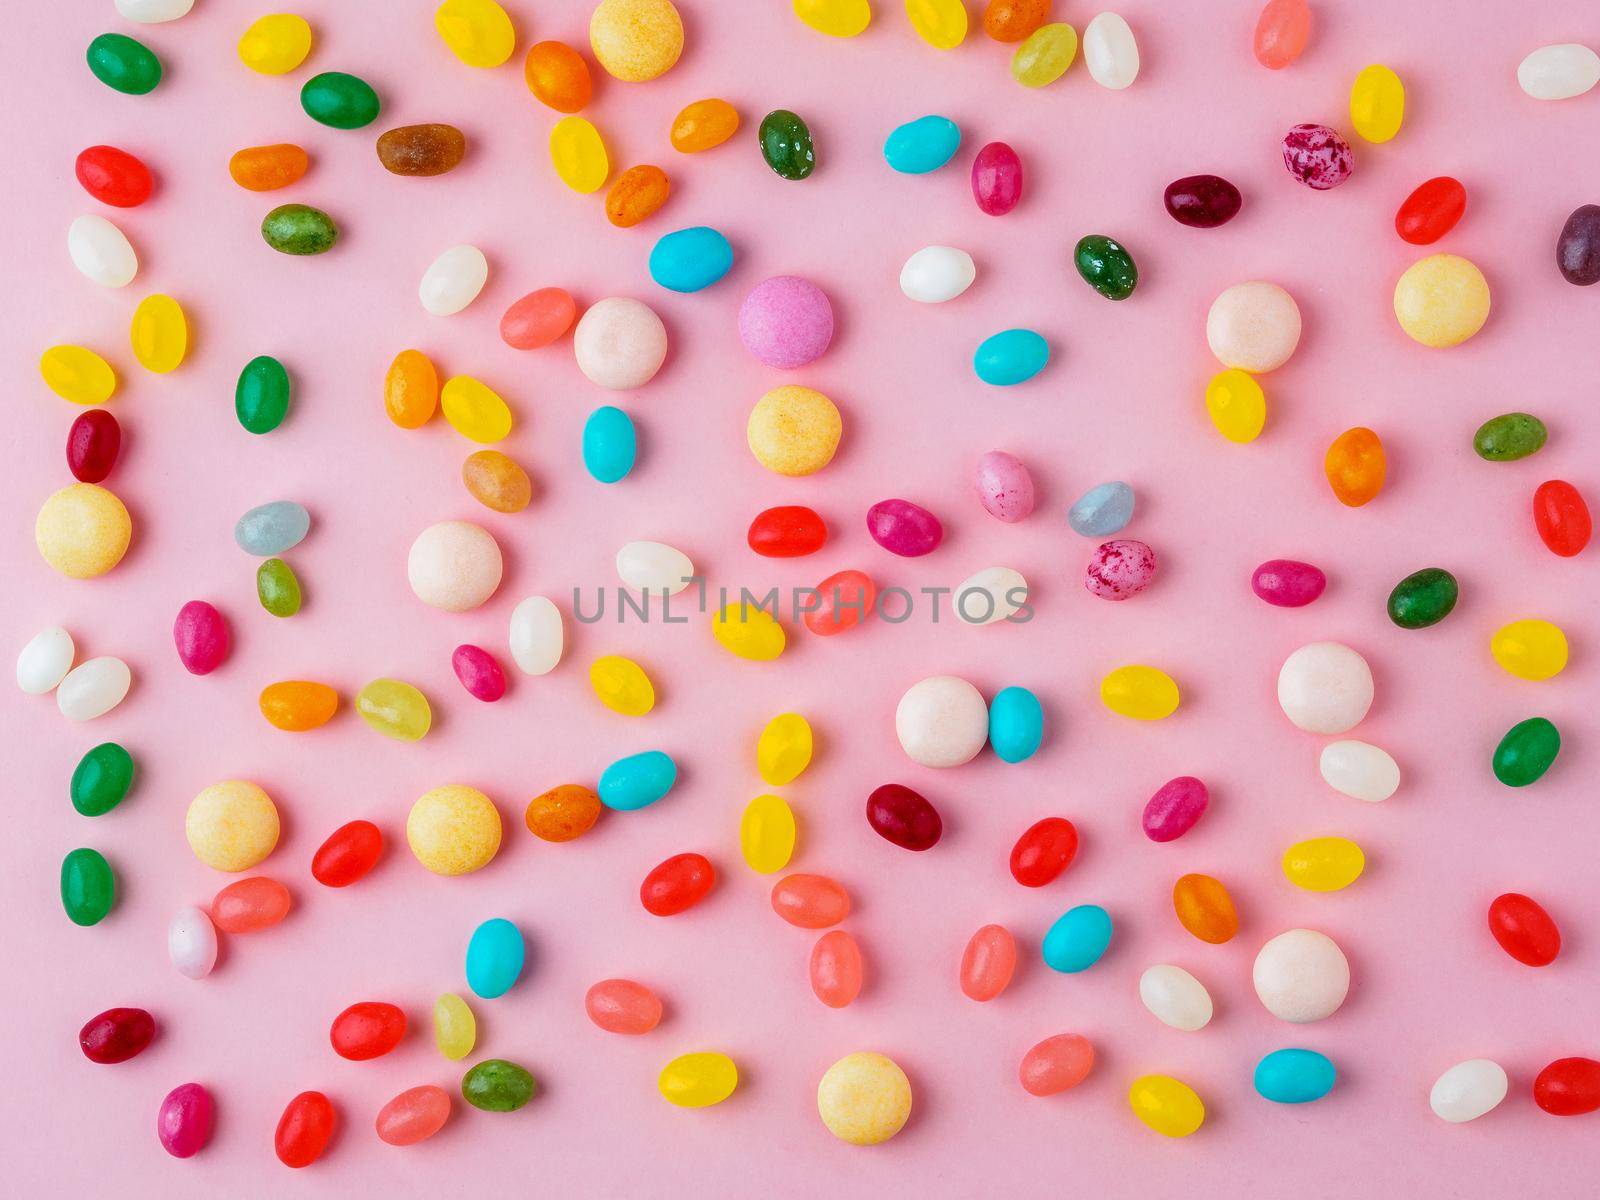 Many scattered colorful sweets, candies, lollipops on bright pink background, top view by NataBene